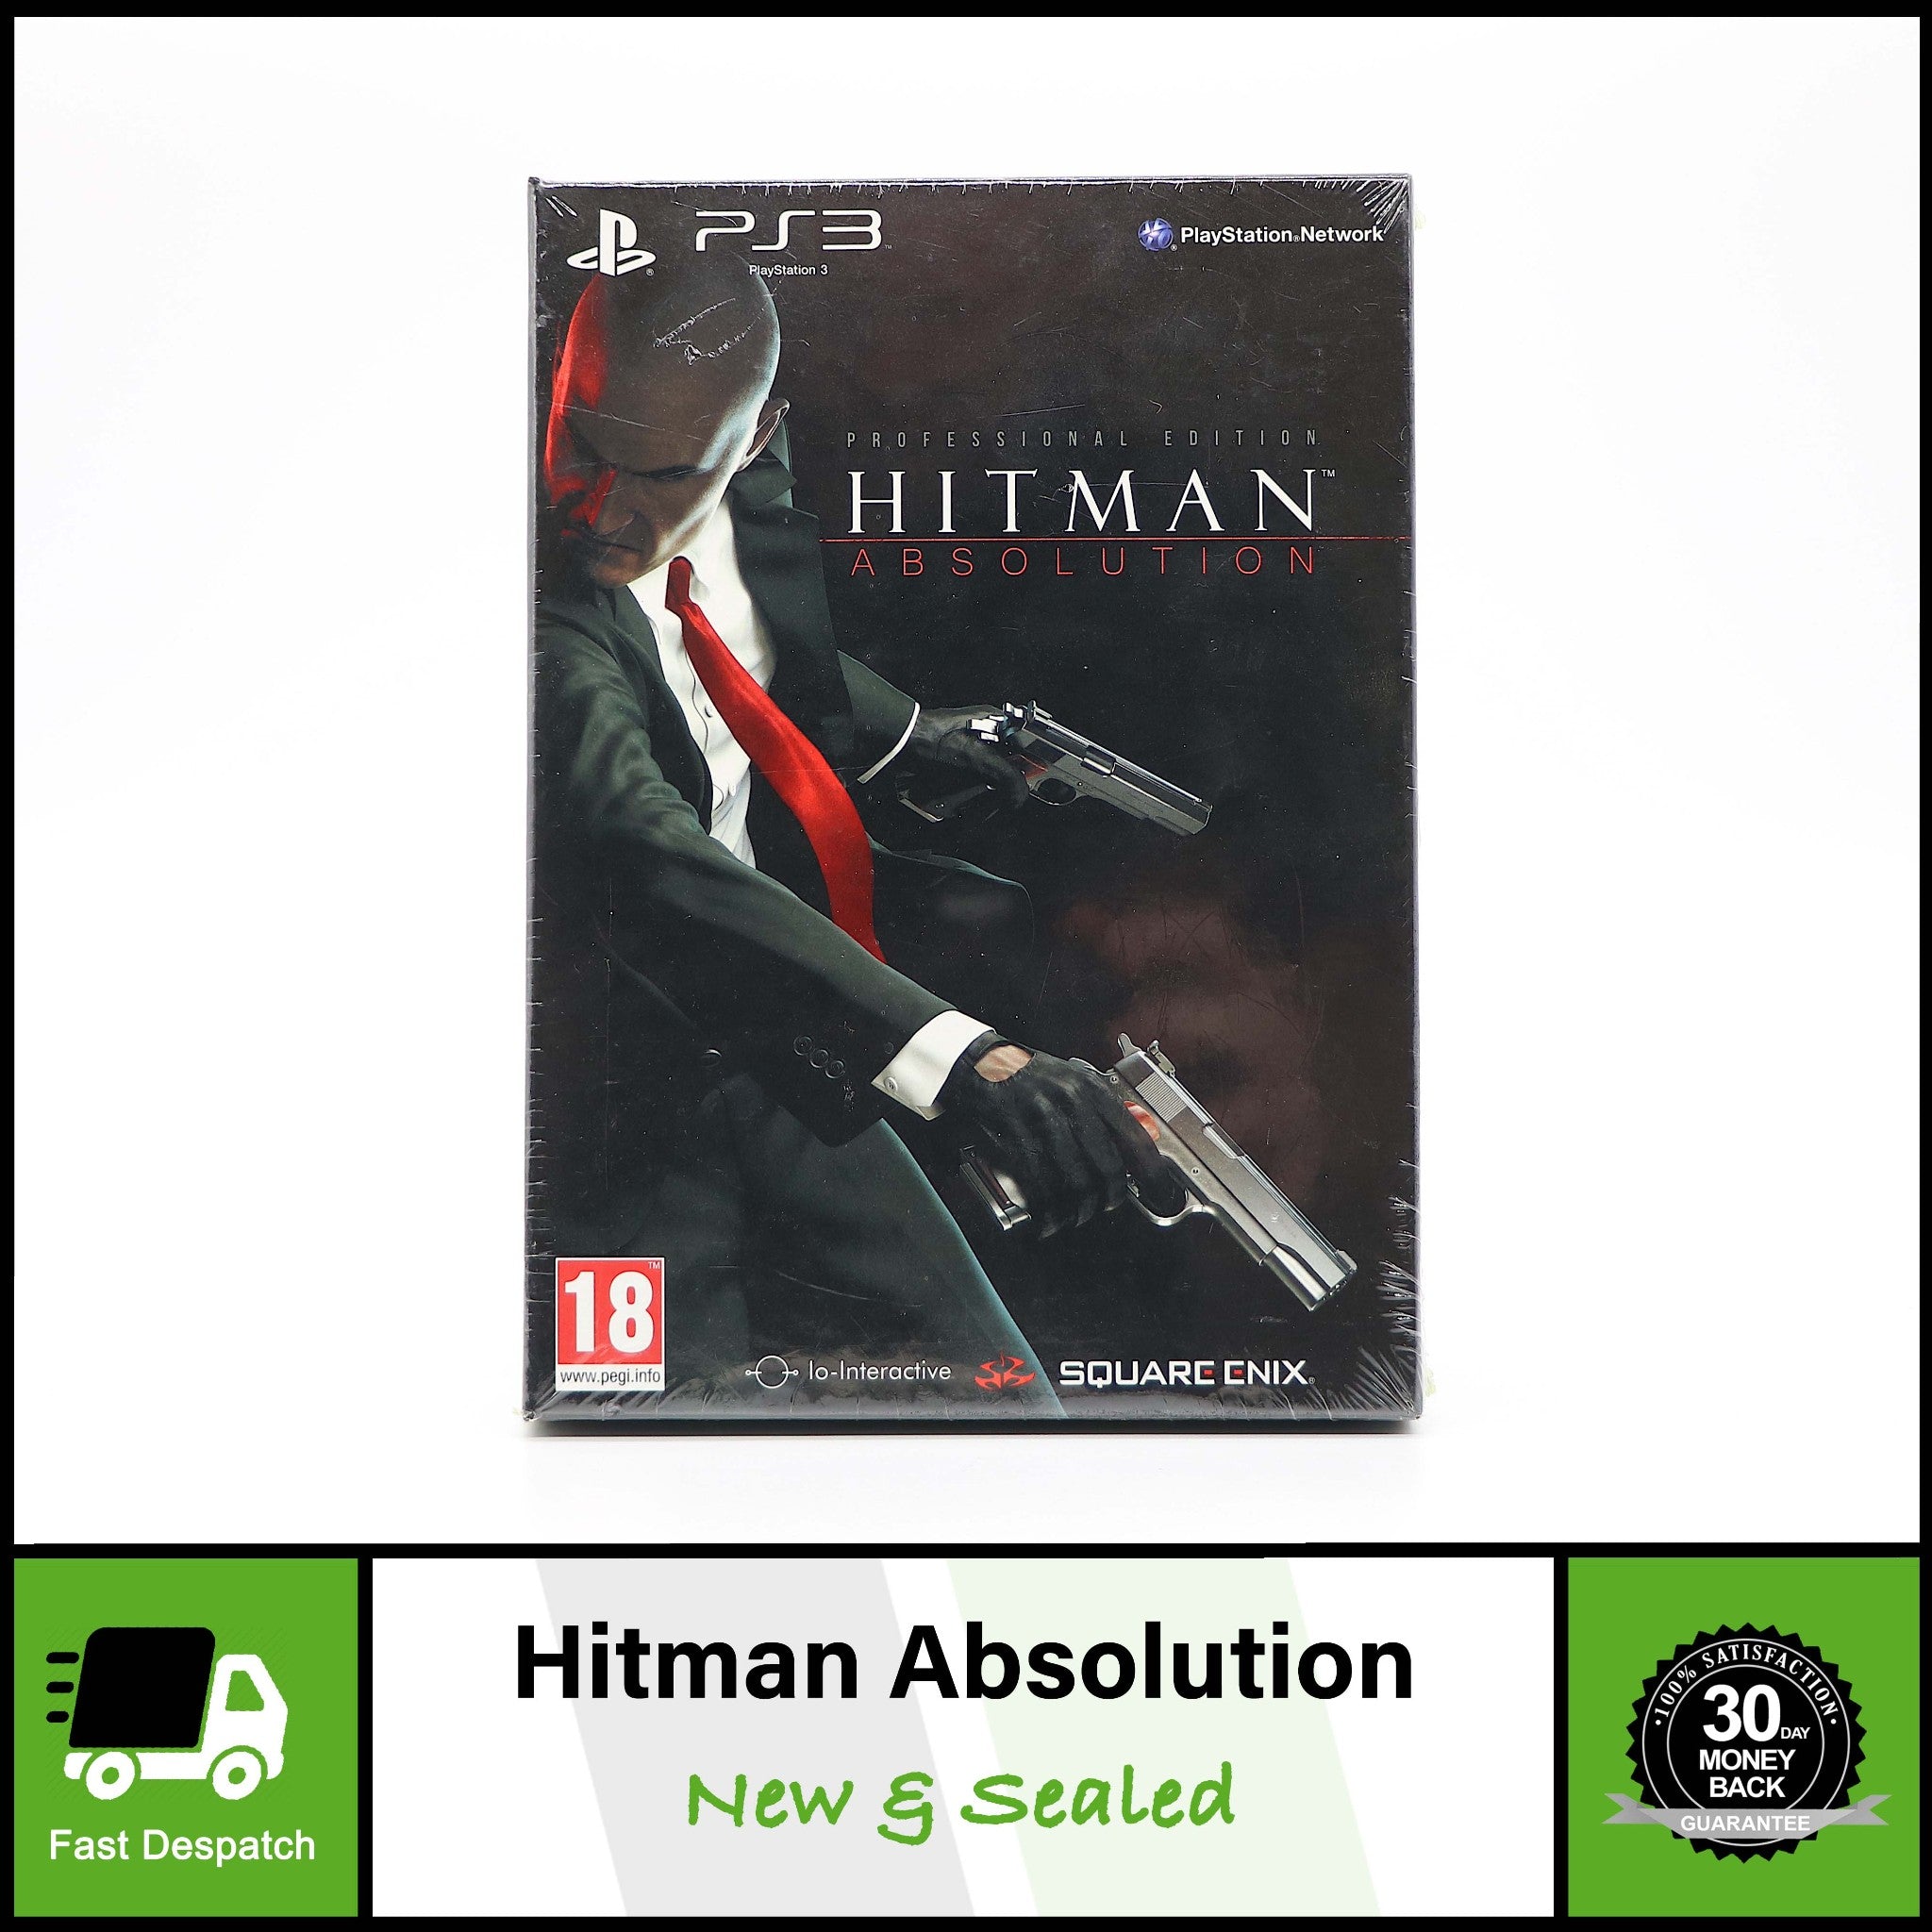 Hitman Absolution Professional Edition | Sony PS3 Game | New & Sealed